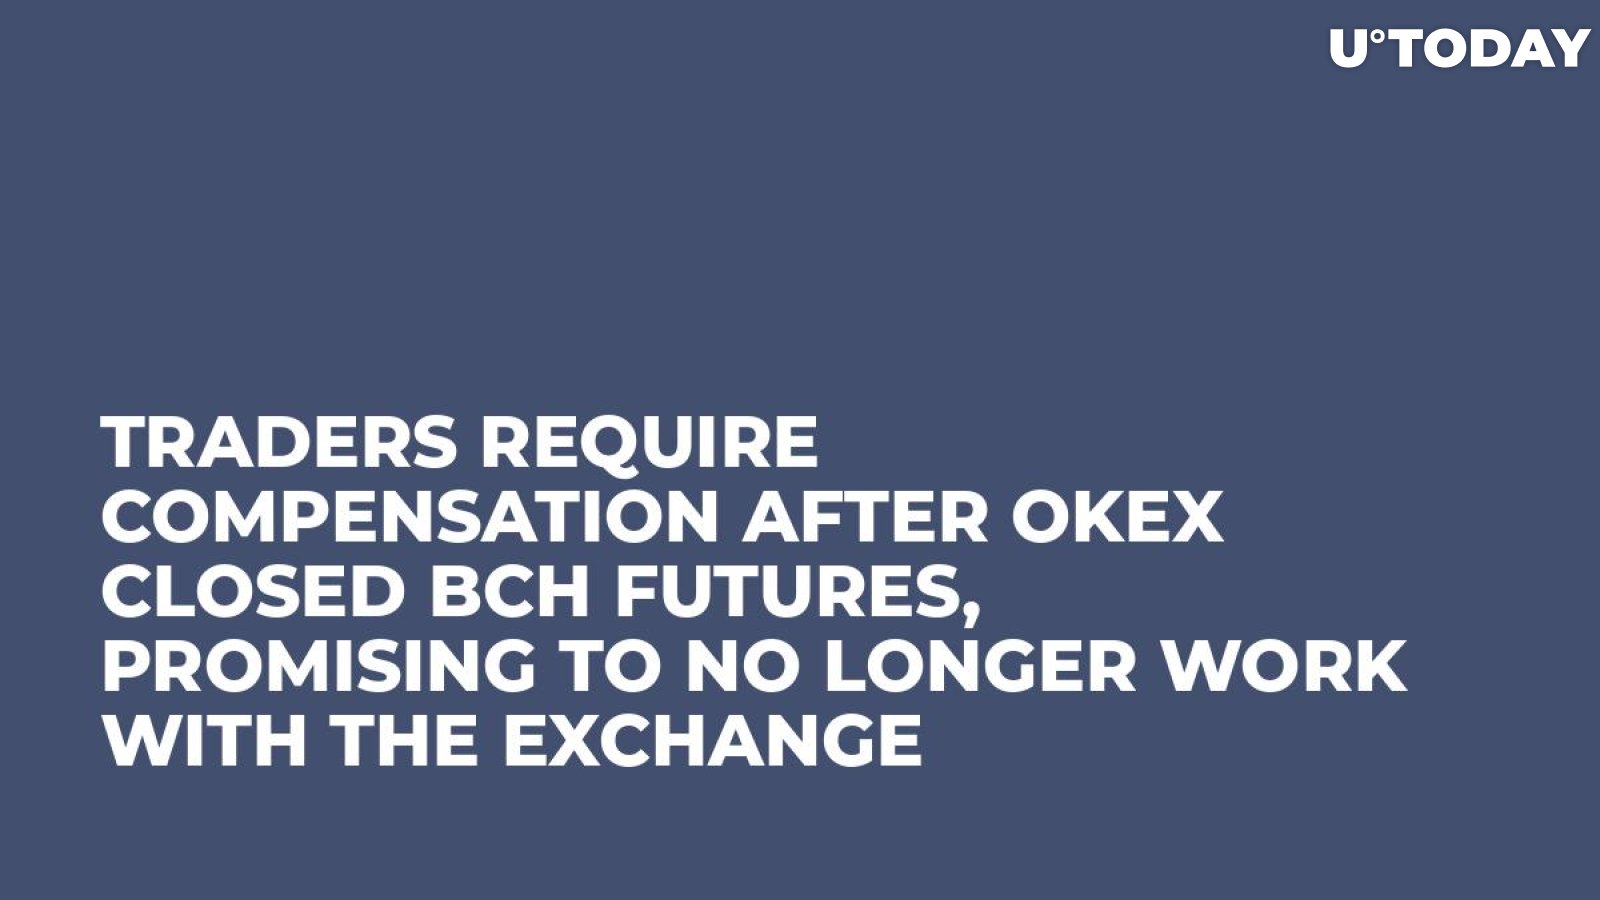 Traders Require Compensation After OKEx Closed BCH Futures, Promising to No Longer Work with the Exchange